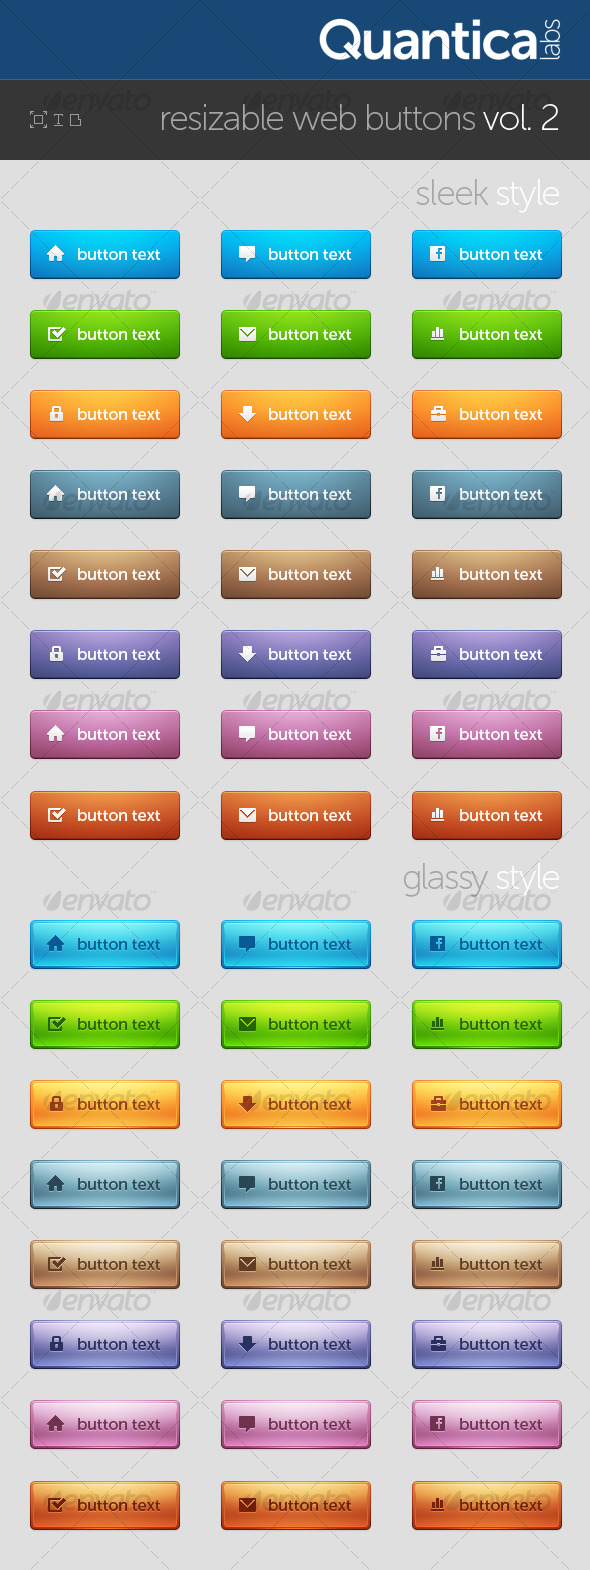 Resizable Web Buttons #2